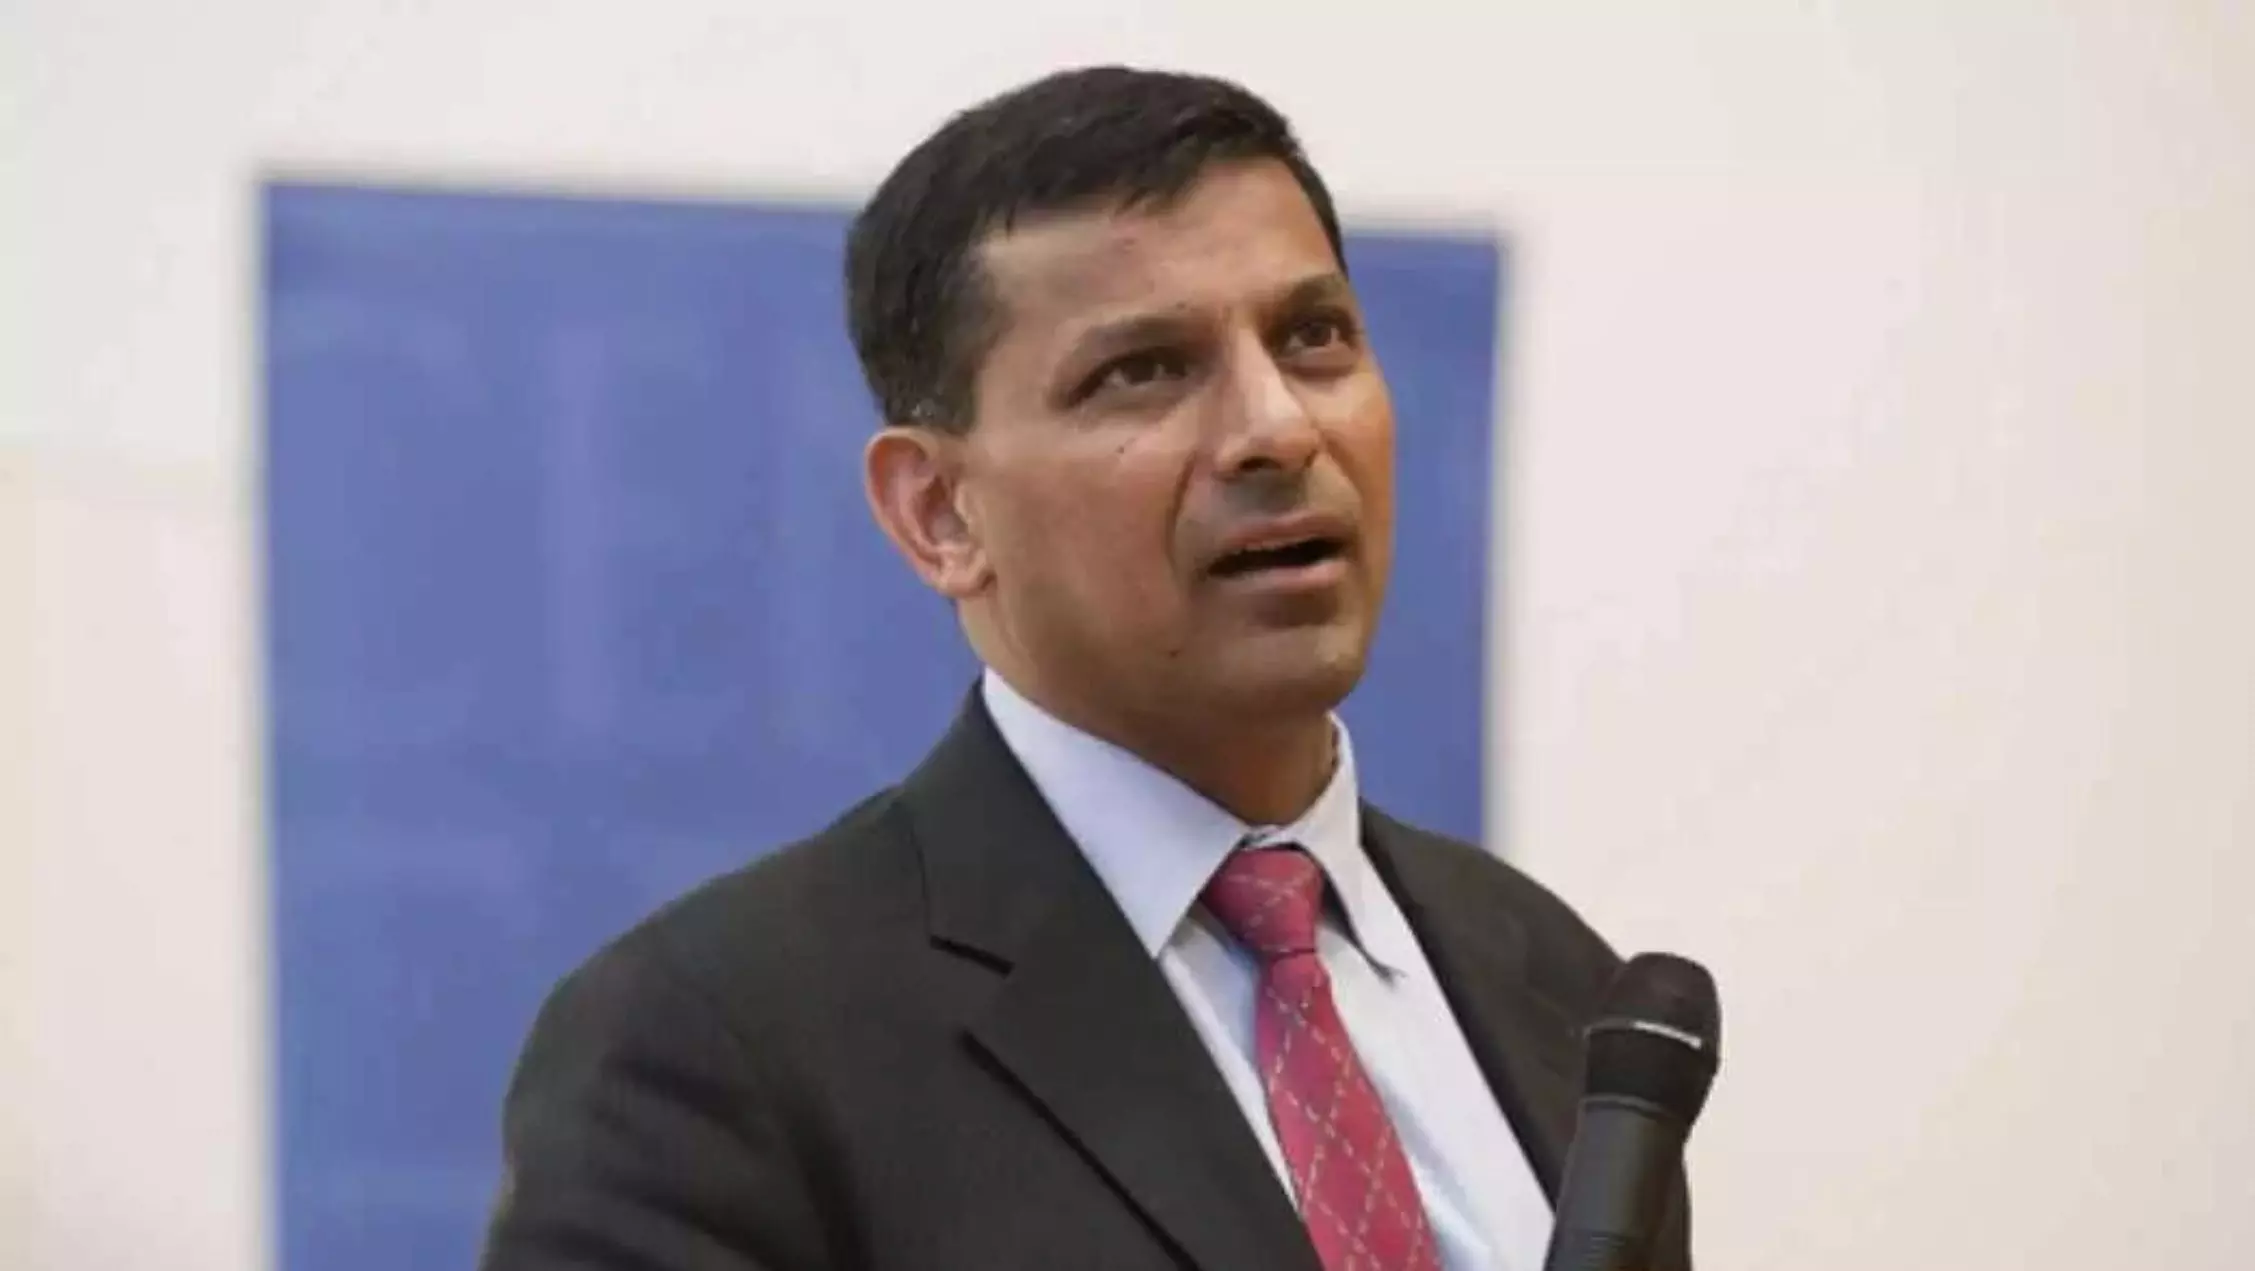 Growth rate at 6%, India will remain lower middle economy: Raghuram Rajan